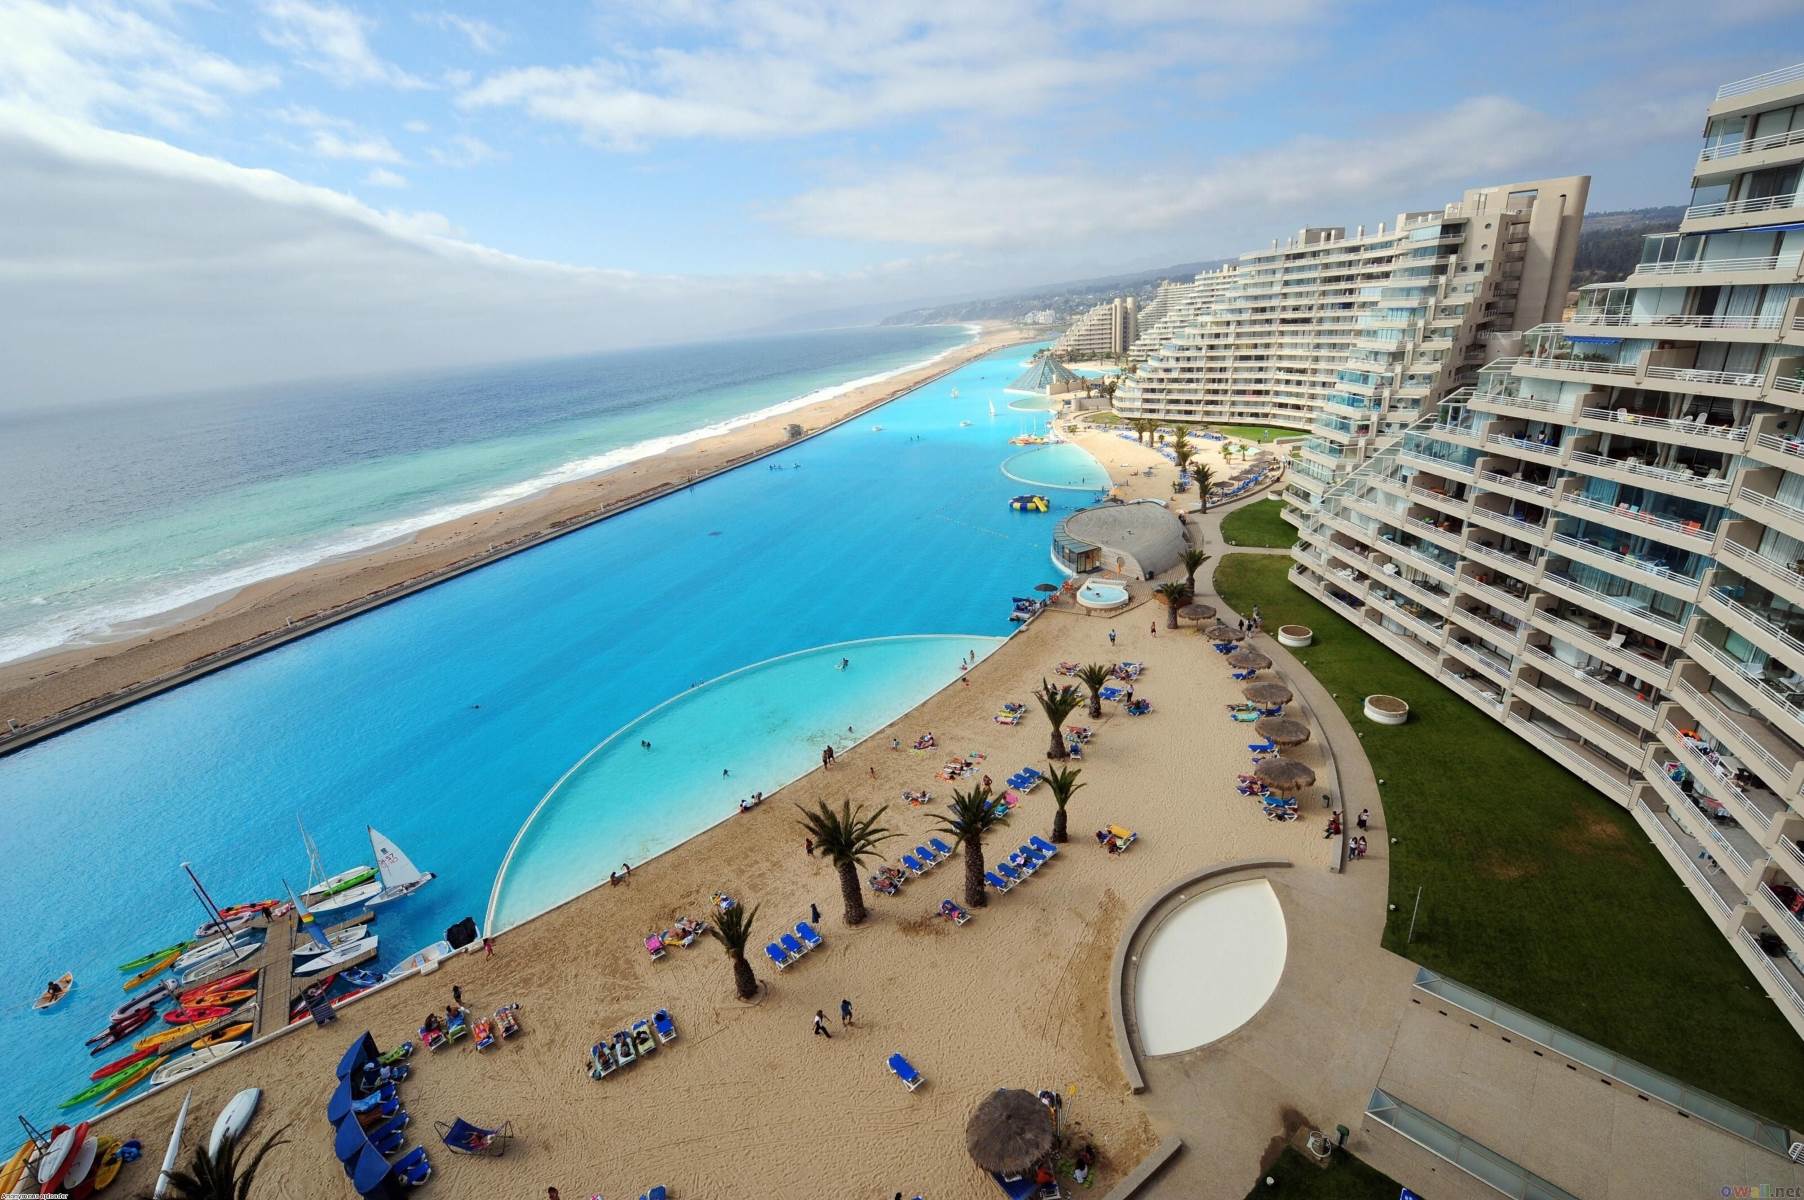 What Is The World’s Largest Swimming Pool